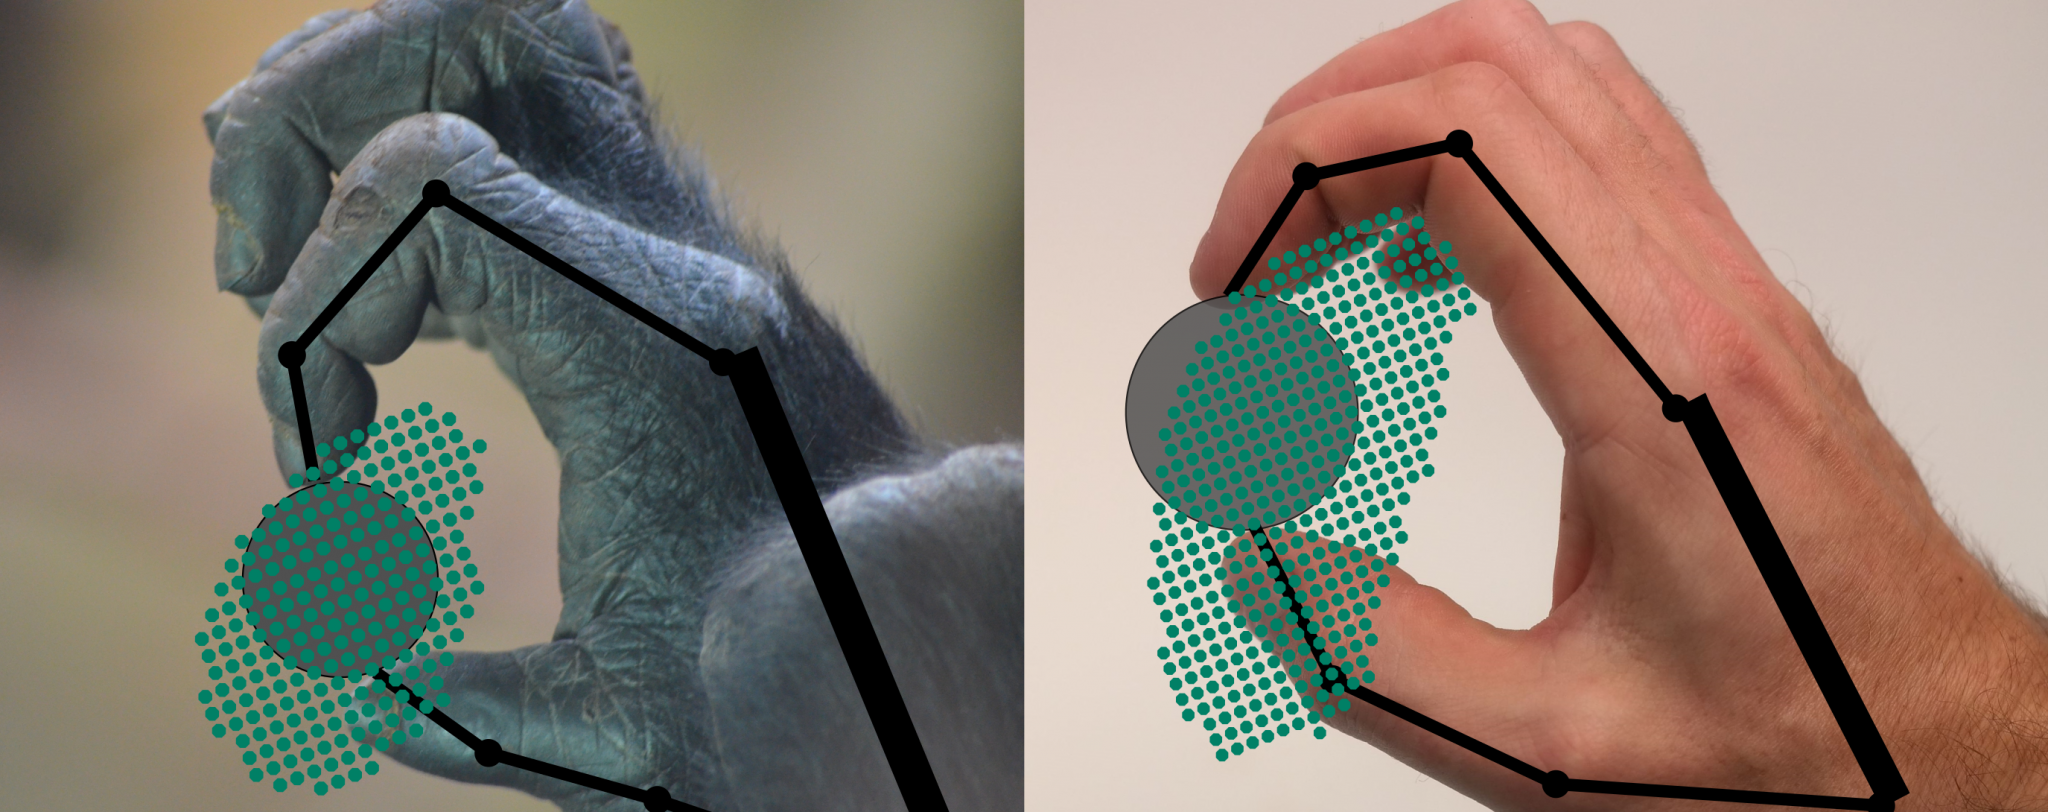 Chimp and human hand showing variation in the precision grip manipulation between the thumb and index finger.  Photo credit:T. Feix and E. Pouydebat